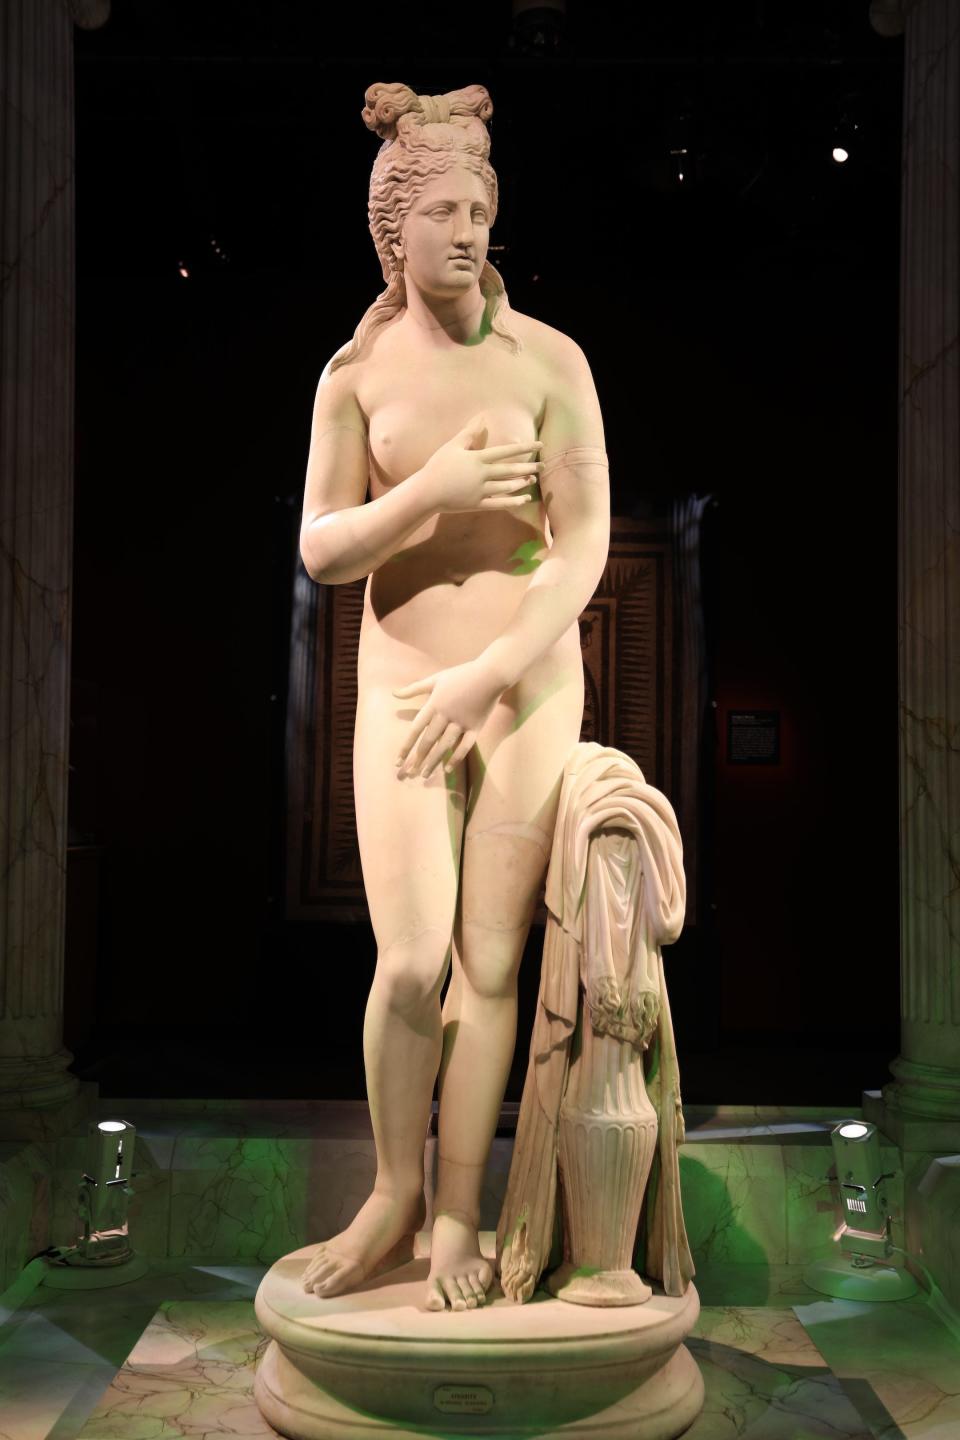 This beautiful statue is one of more than 150 priceless artifacts displayed at the exhibit.